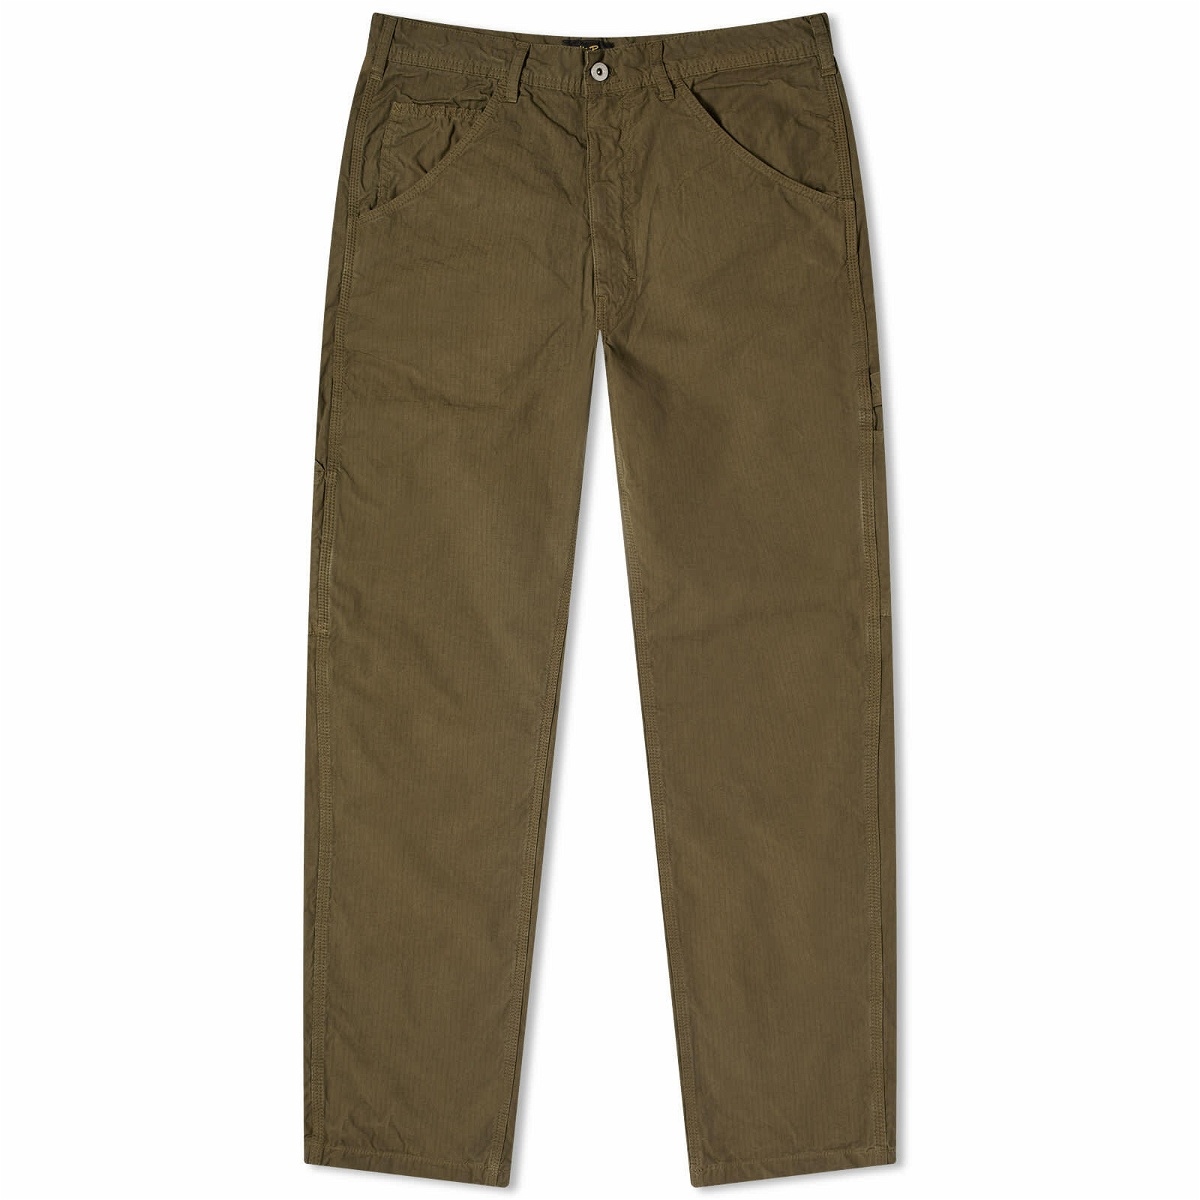 Stan Ray Men's OG Painter Pant in Olive Ripstop Stan Ray